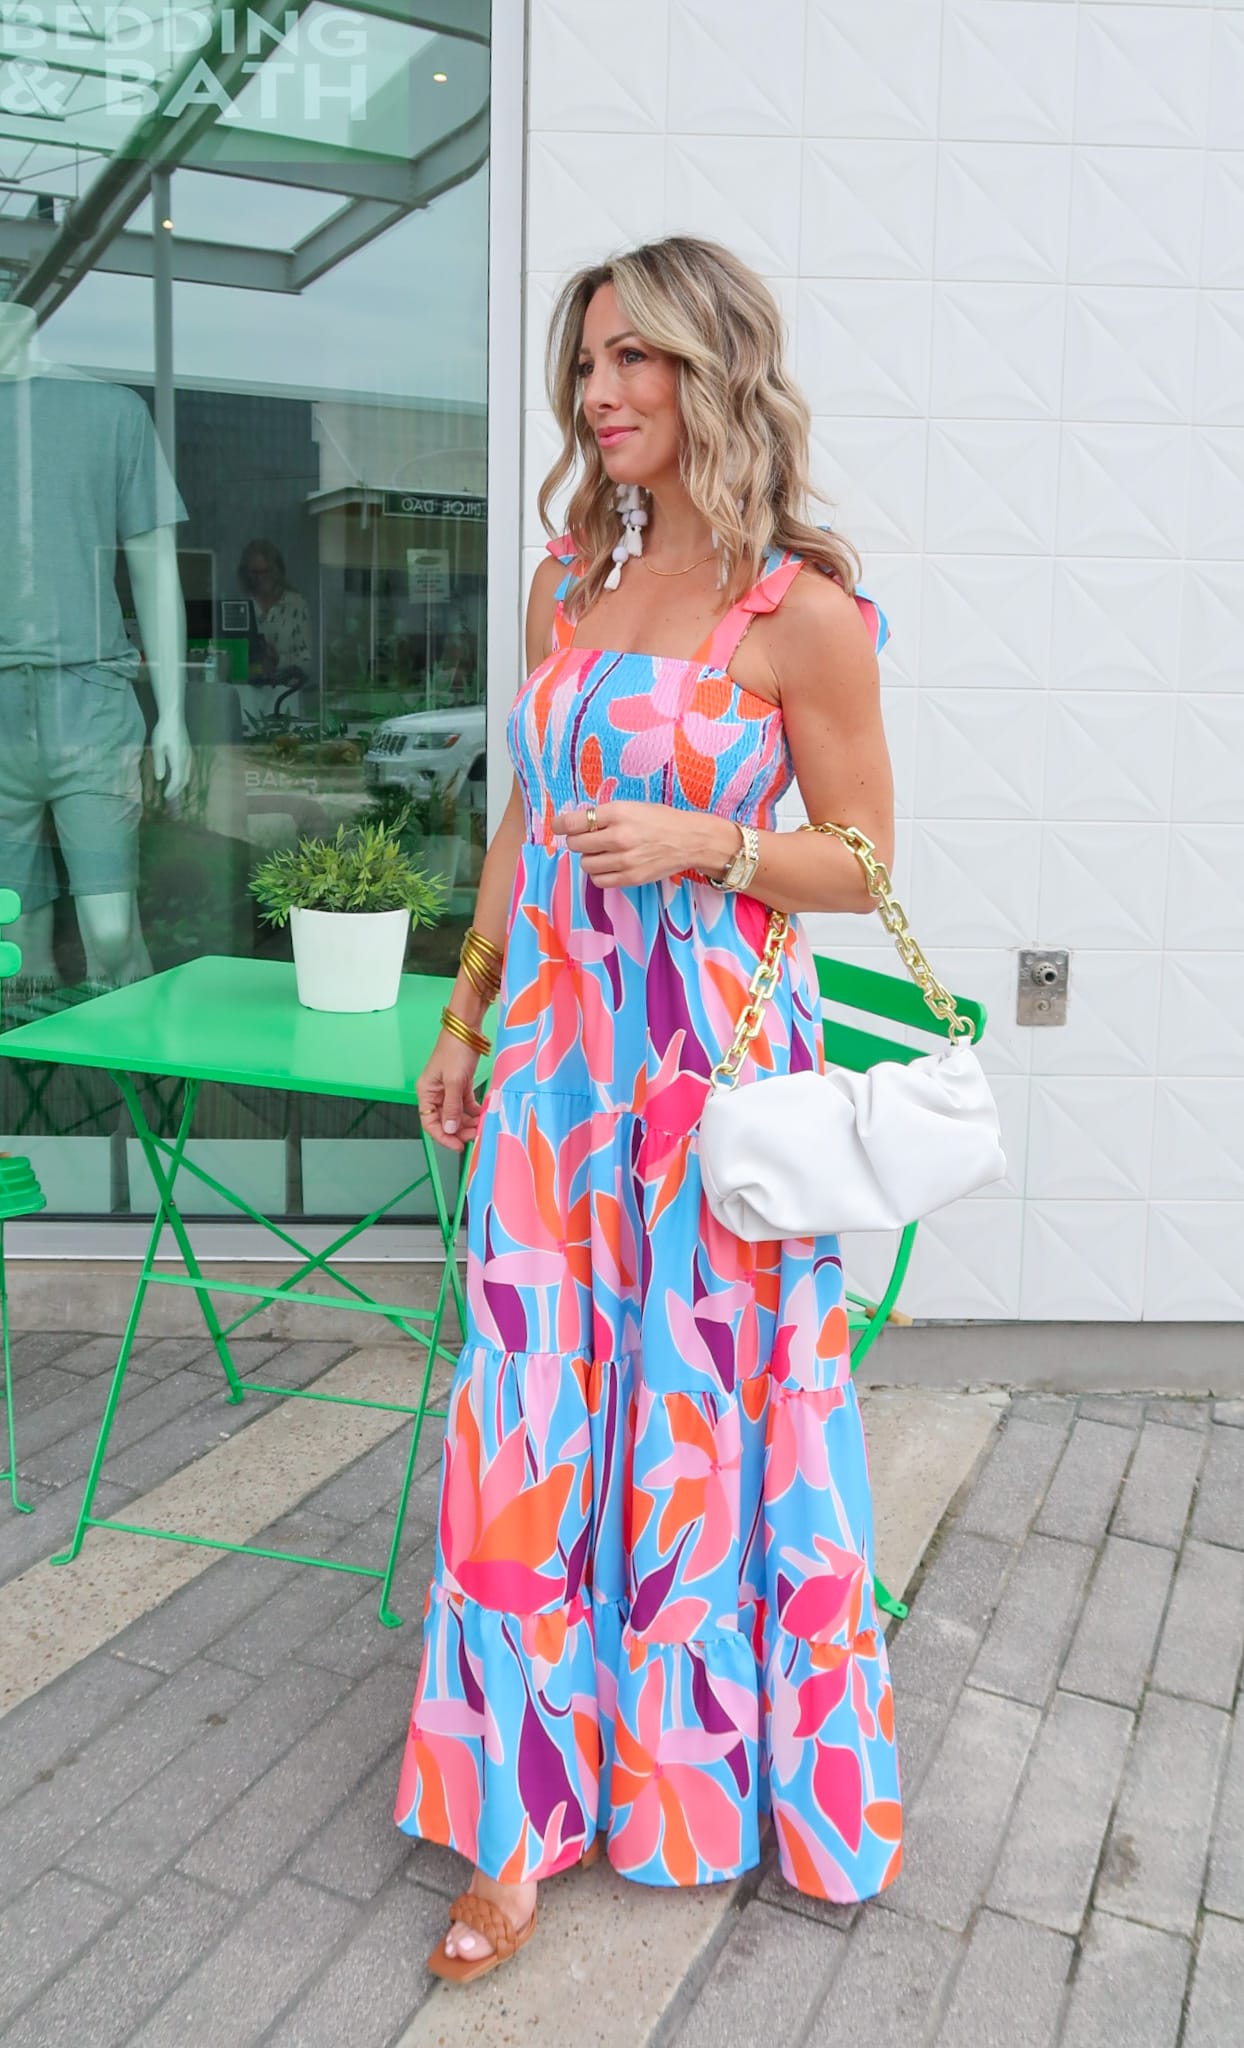 Floral Dress, with tie Straps, Braided sandals, White purse with gold chain